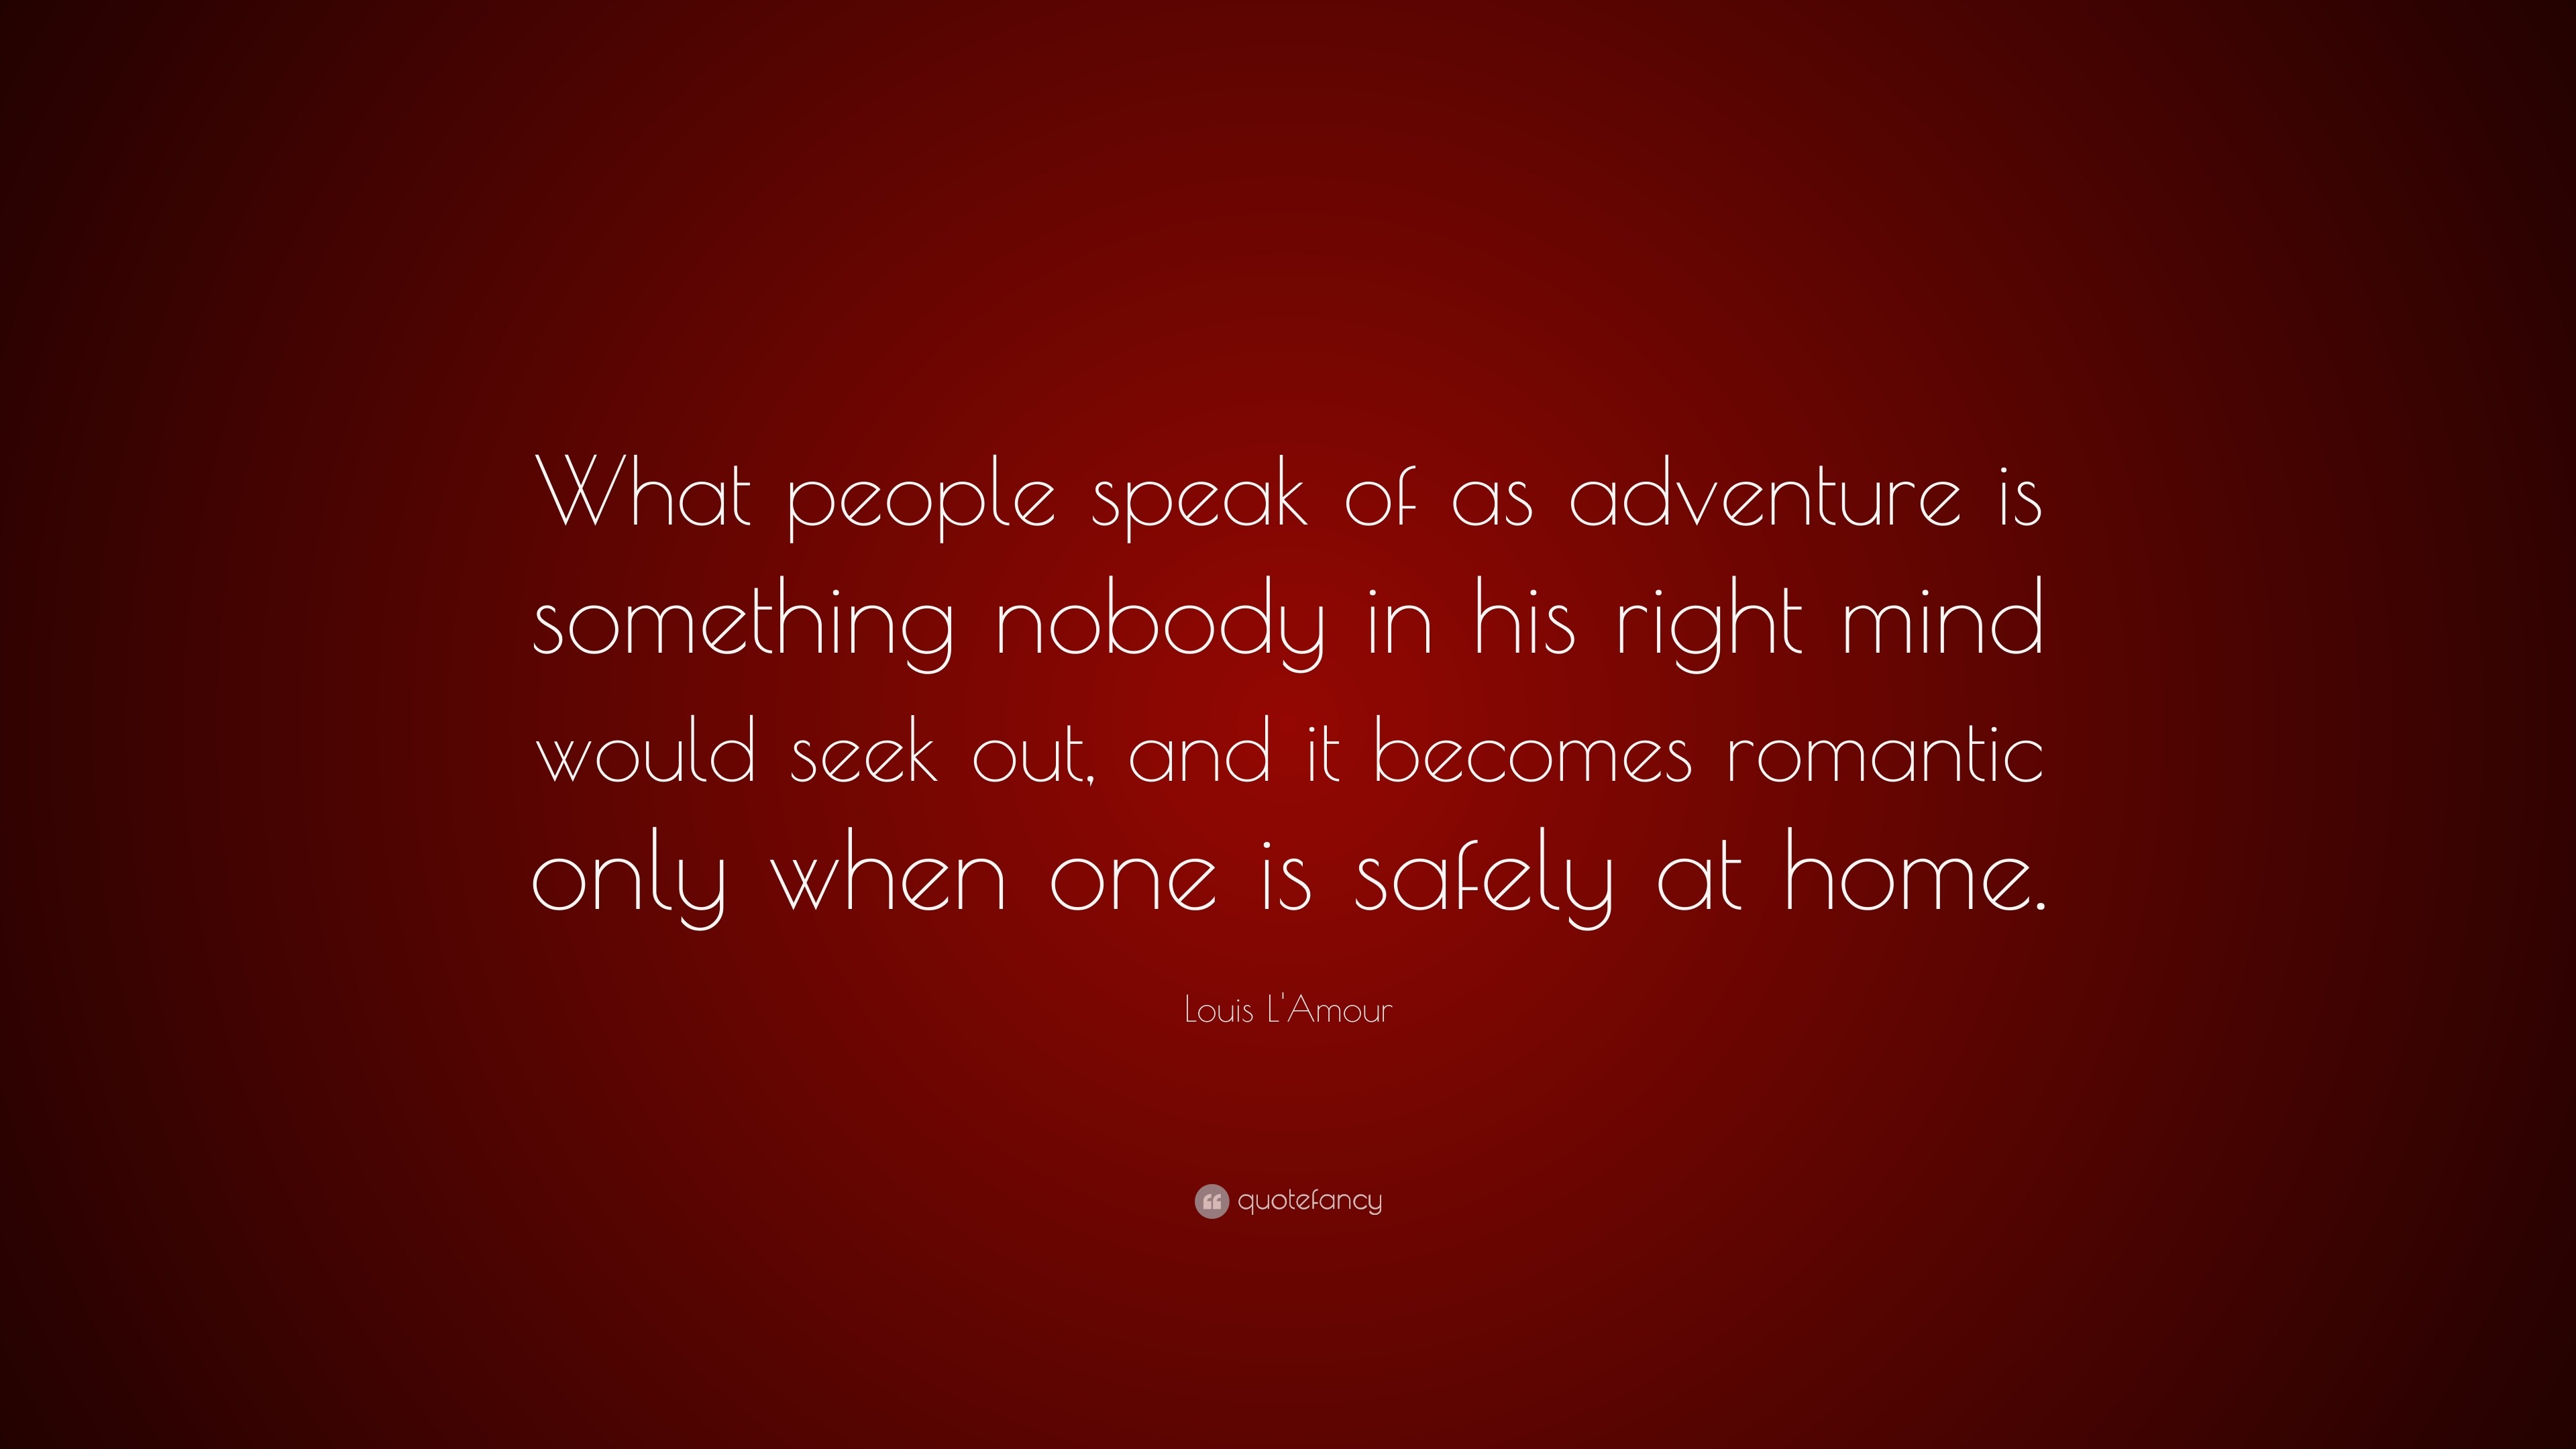 Louis L&#39;Amour Quote: “What people speak of as adventure is something nobody in his right mind ...